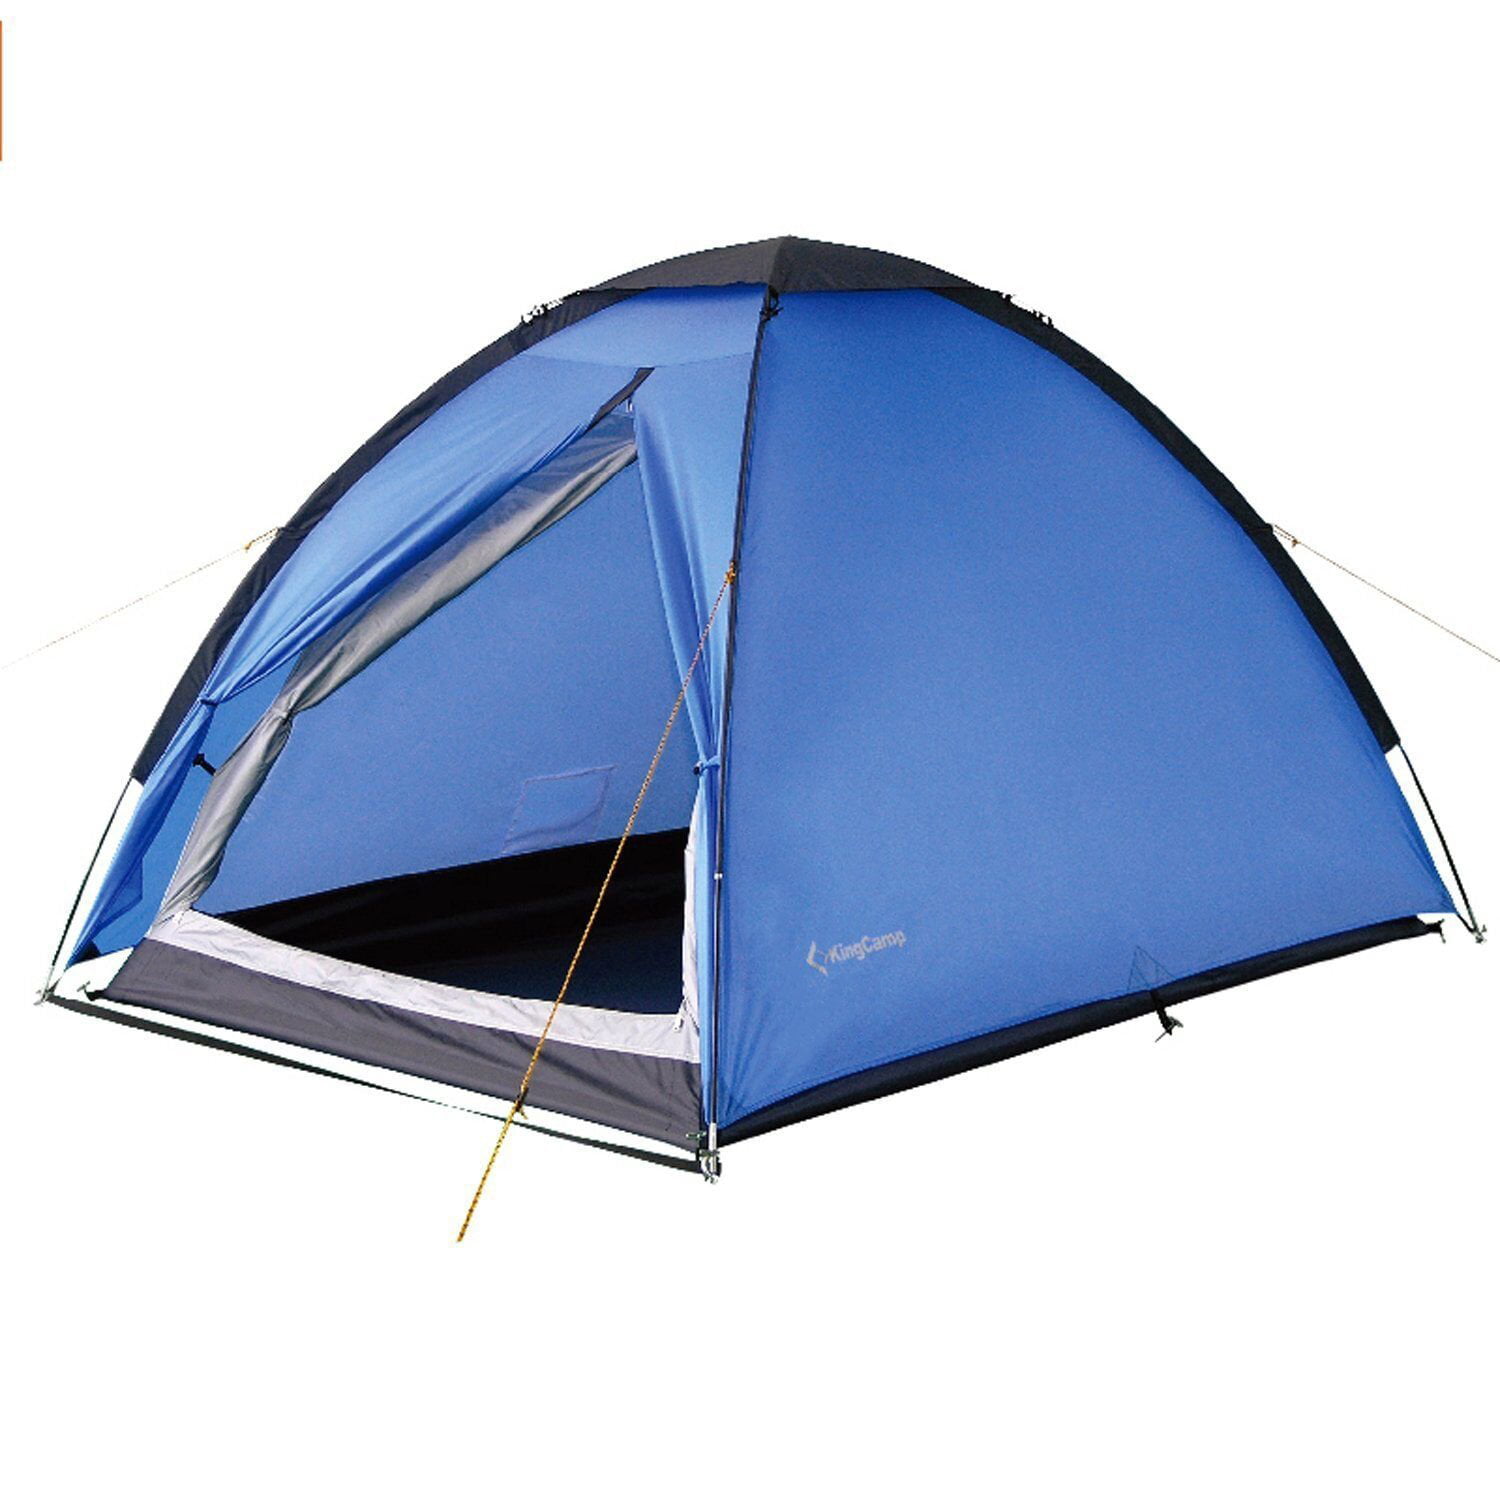 KingCamp Trekking Tent his 2-3 Persons Camping Bicycle Bike Dome Tent Easy 